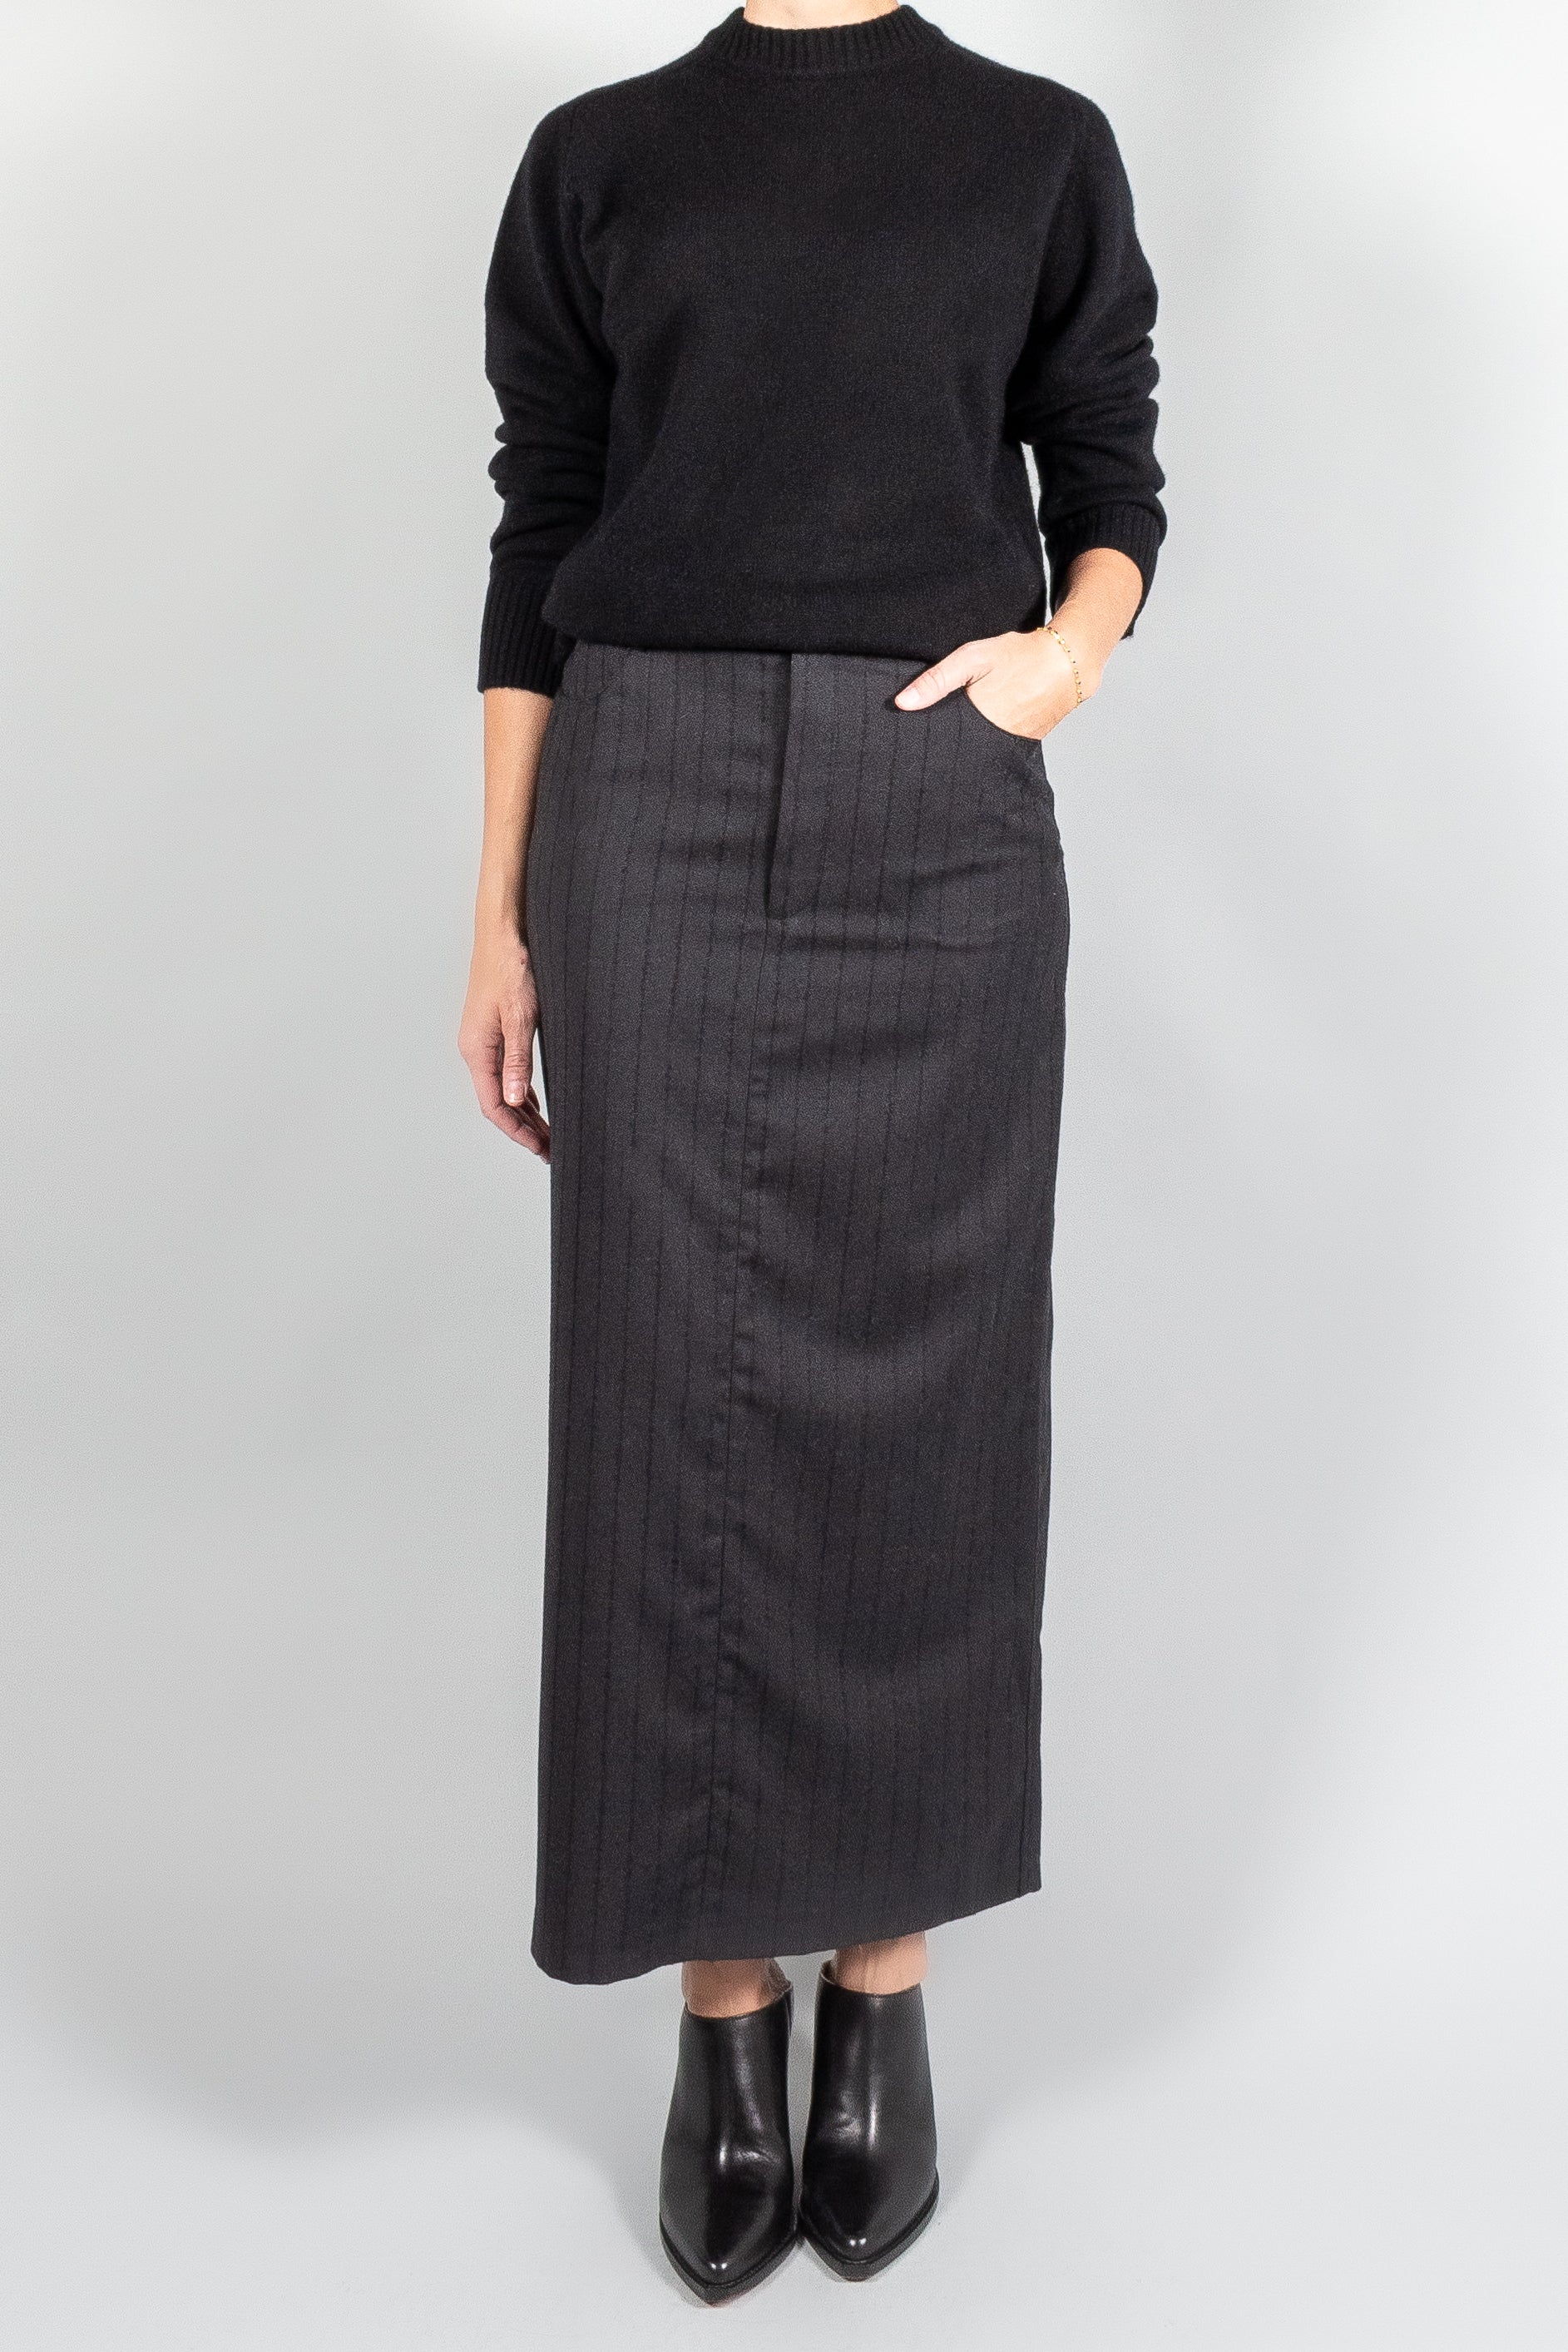 Loulou Studio Vato Long Skirt-Skirts-Misch-Vancouver-Canada